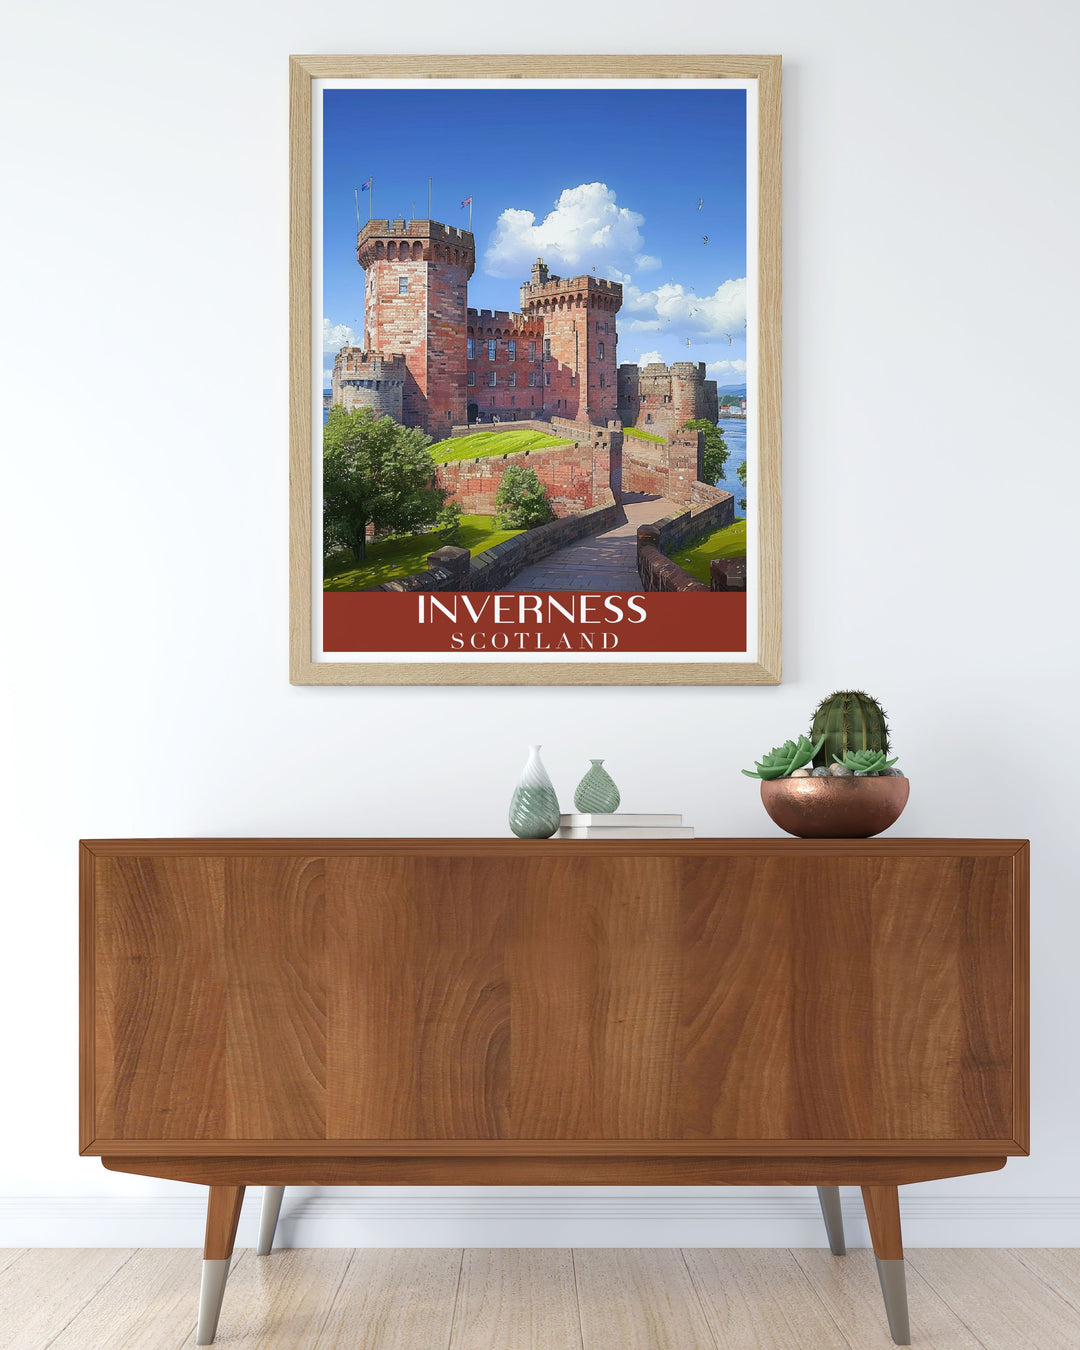 Gallery wall art of Inverness Castle, emphasizing its architectural grandeur and its pivotal role in Scottish history.